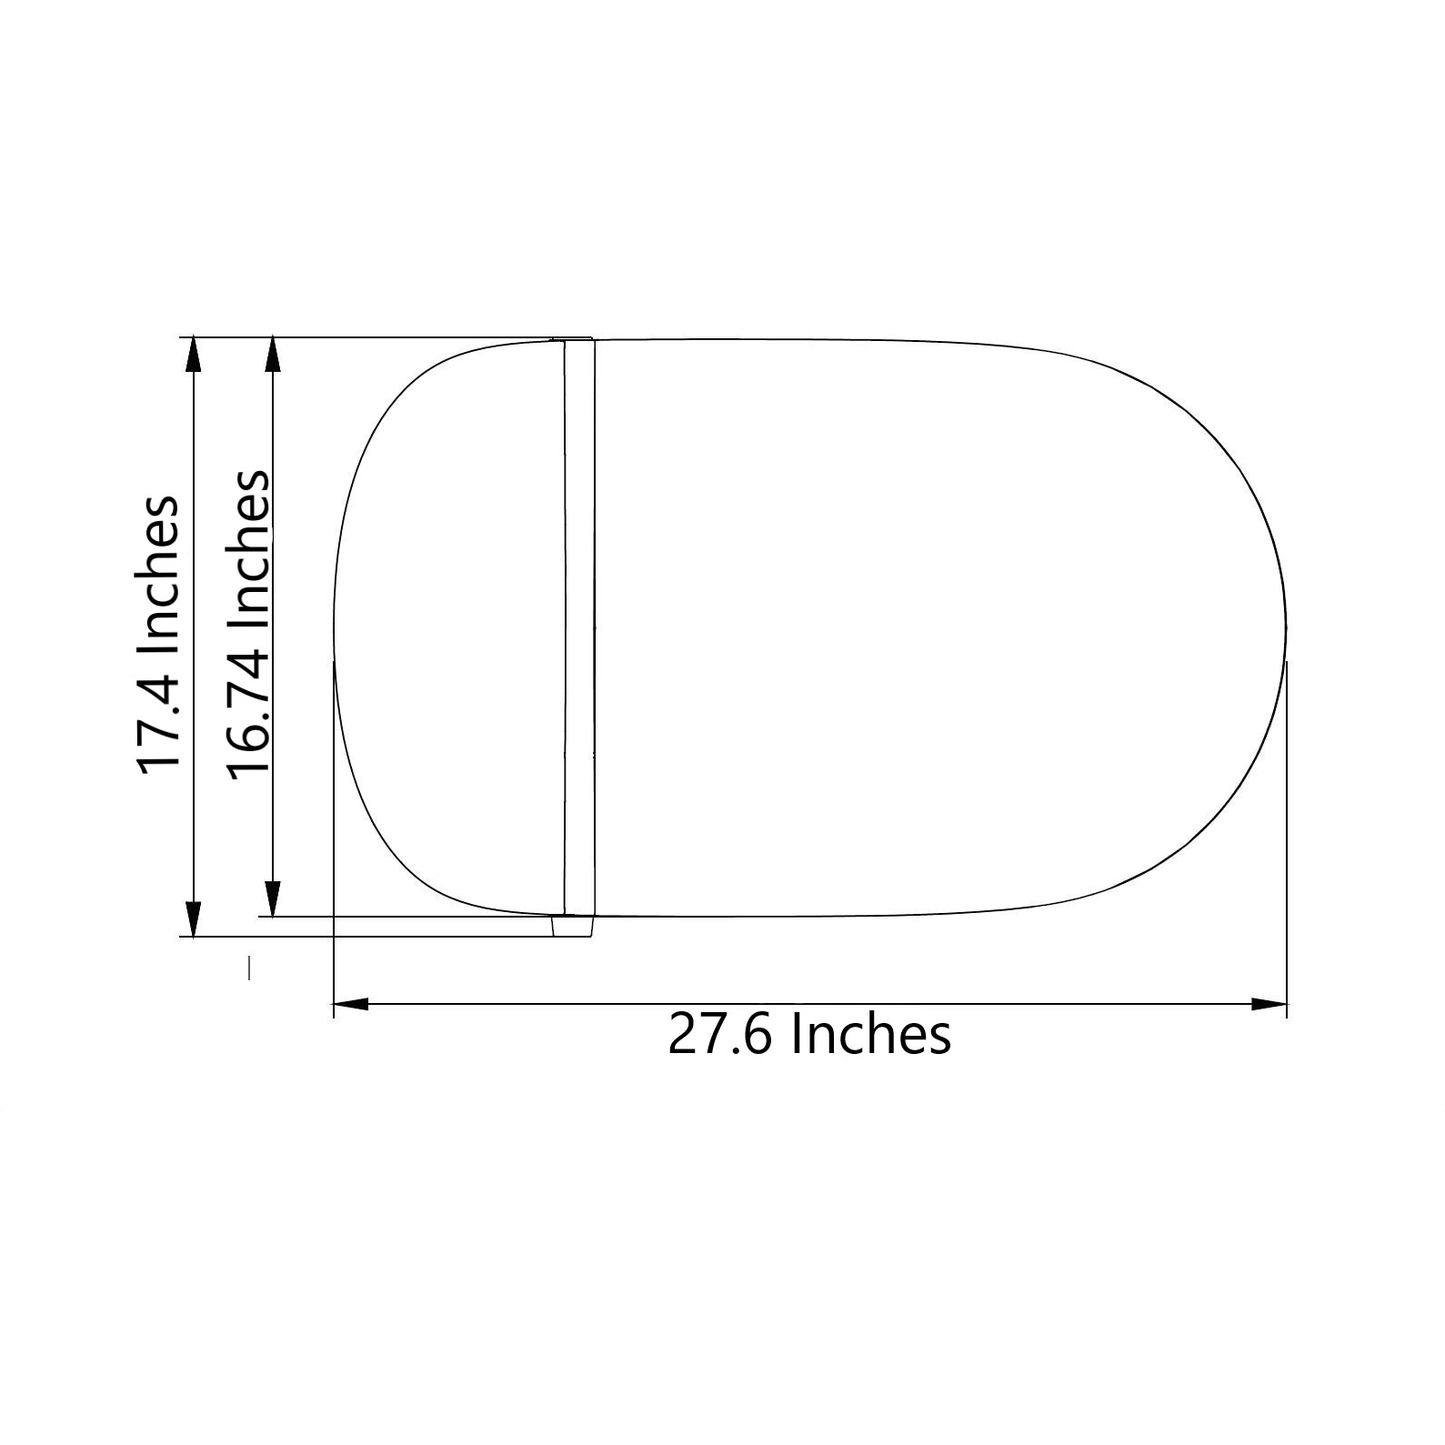 SLi3000 One-Piece Intelligent Toilet - top view diagram with dimensions listed